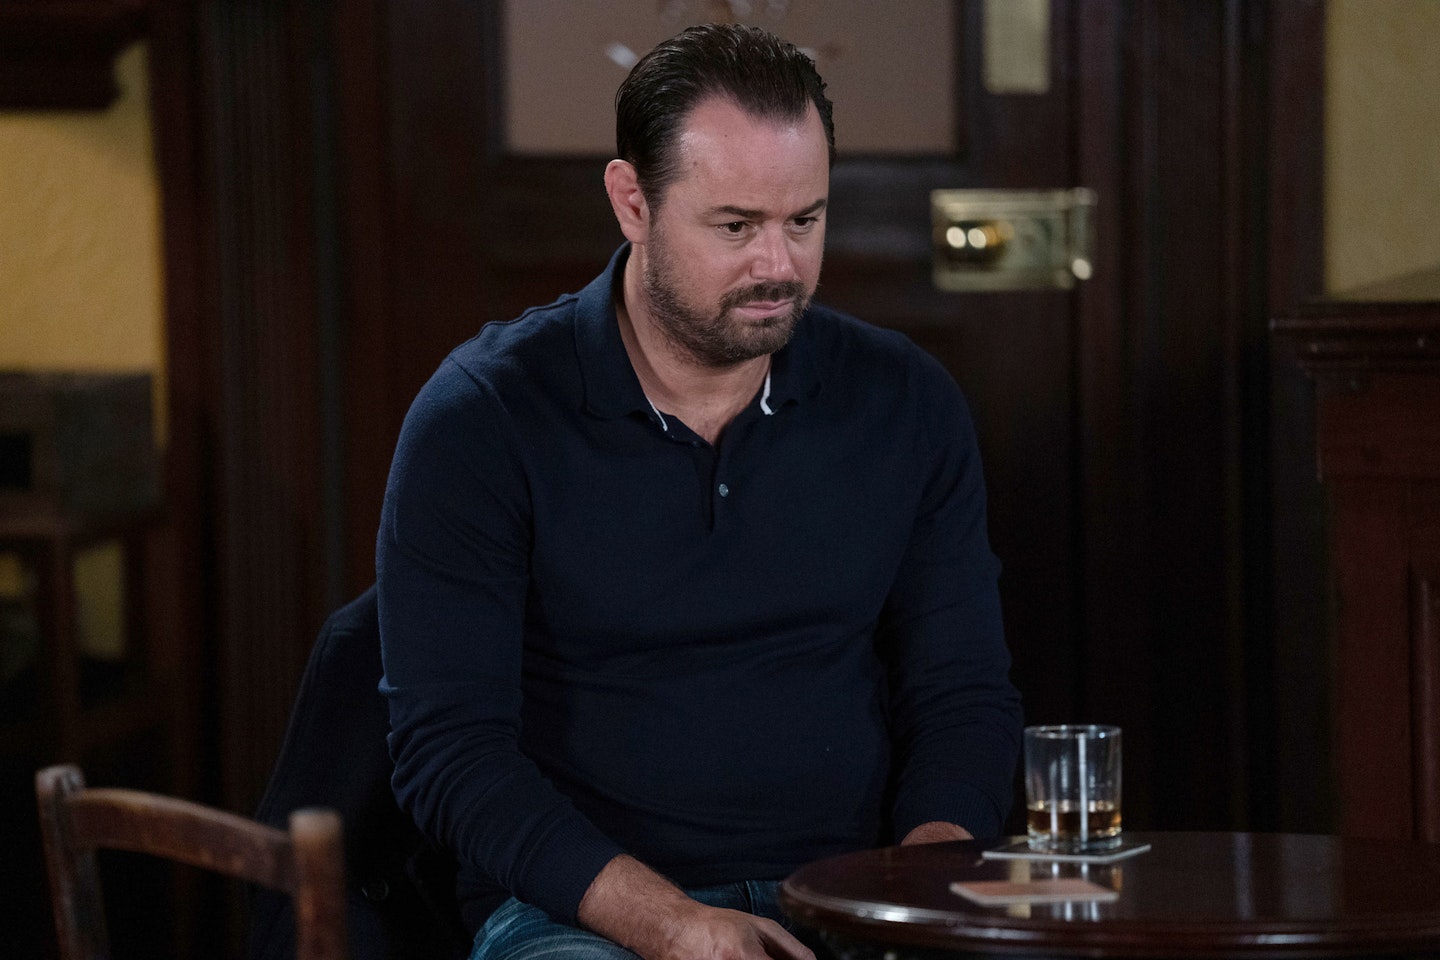 Mick Carter (played by Danny Dyer)